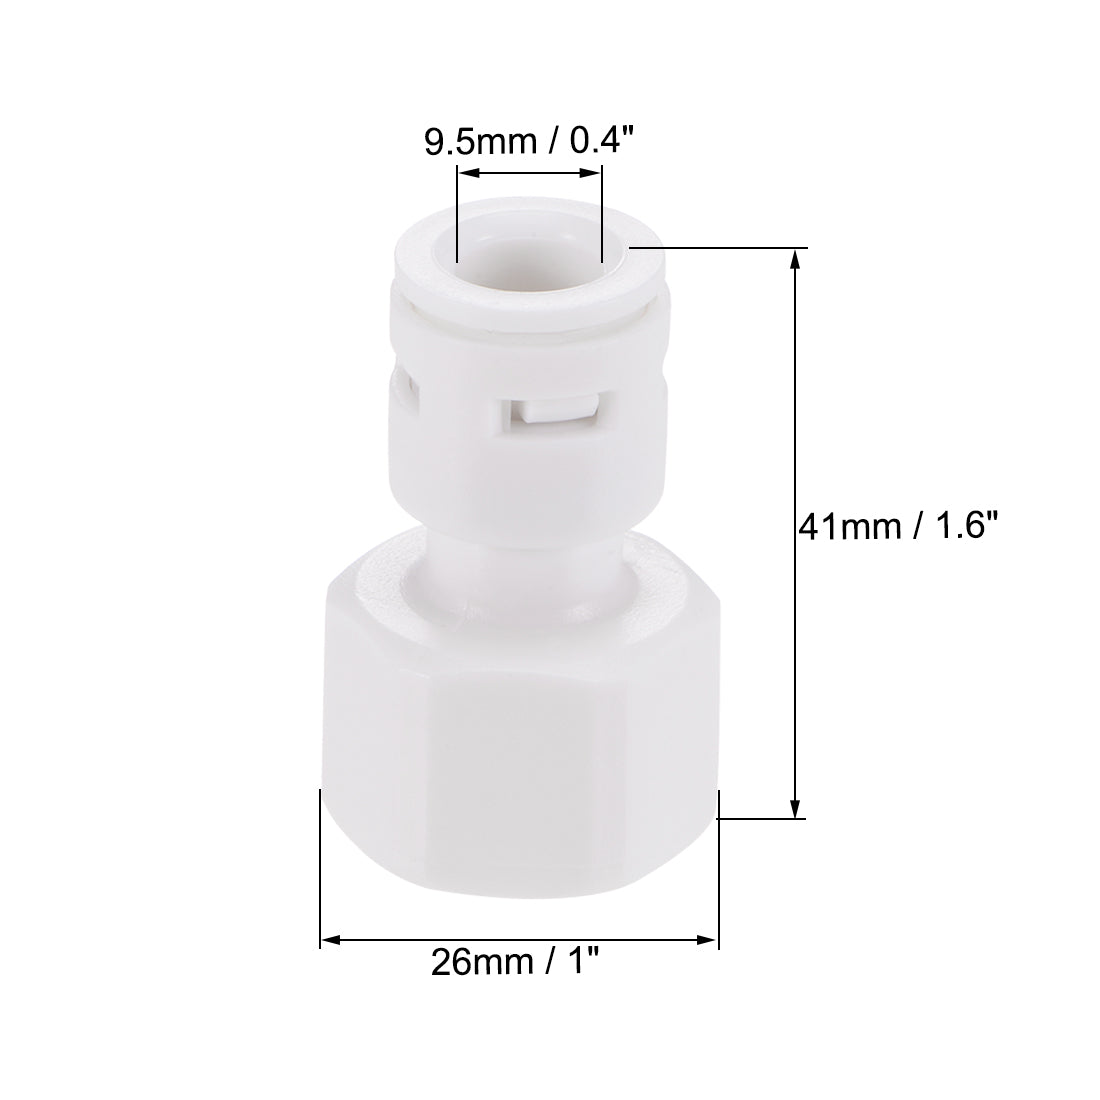 uxcell Uxcell Quick Connector G1/2 Female Thread to 3/8" Tube, Straight Connect Fittings for Water Purifier, 41mm White 5Pcs